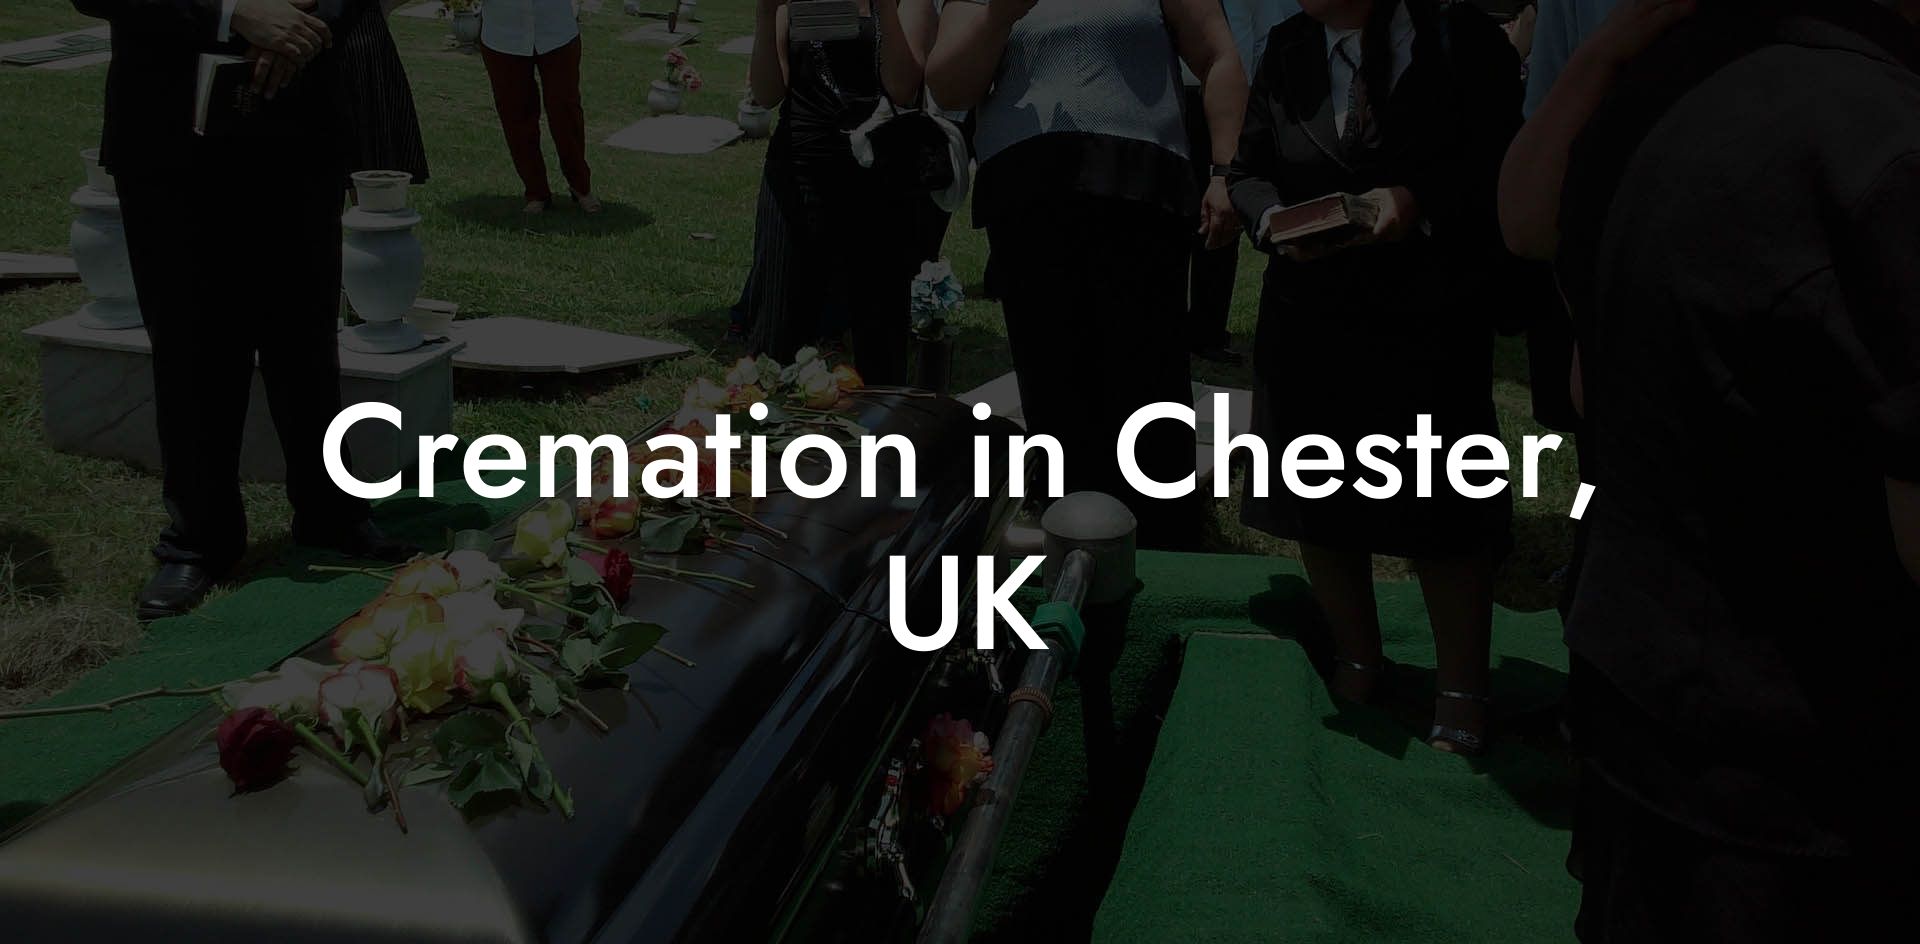 Cremation in Chester, UK